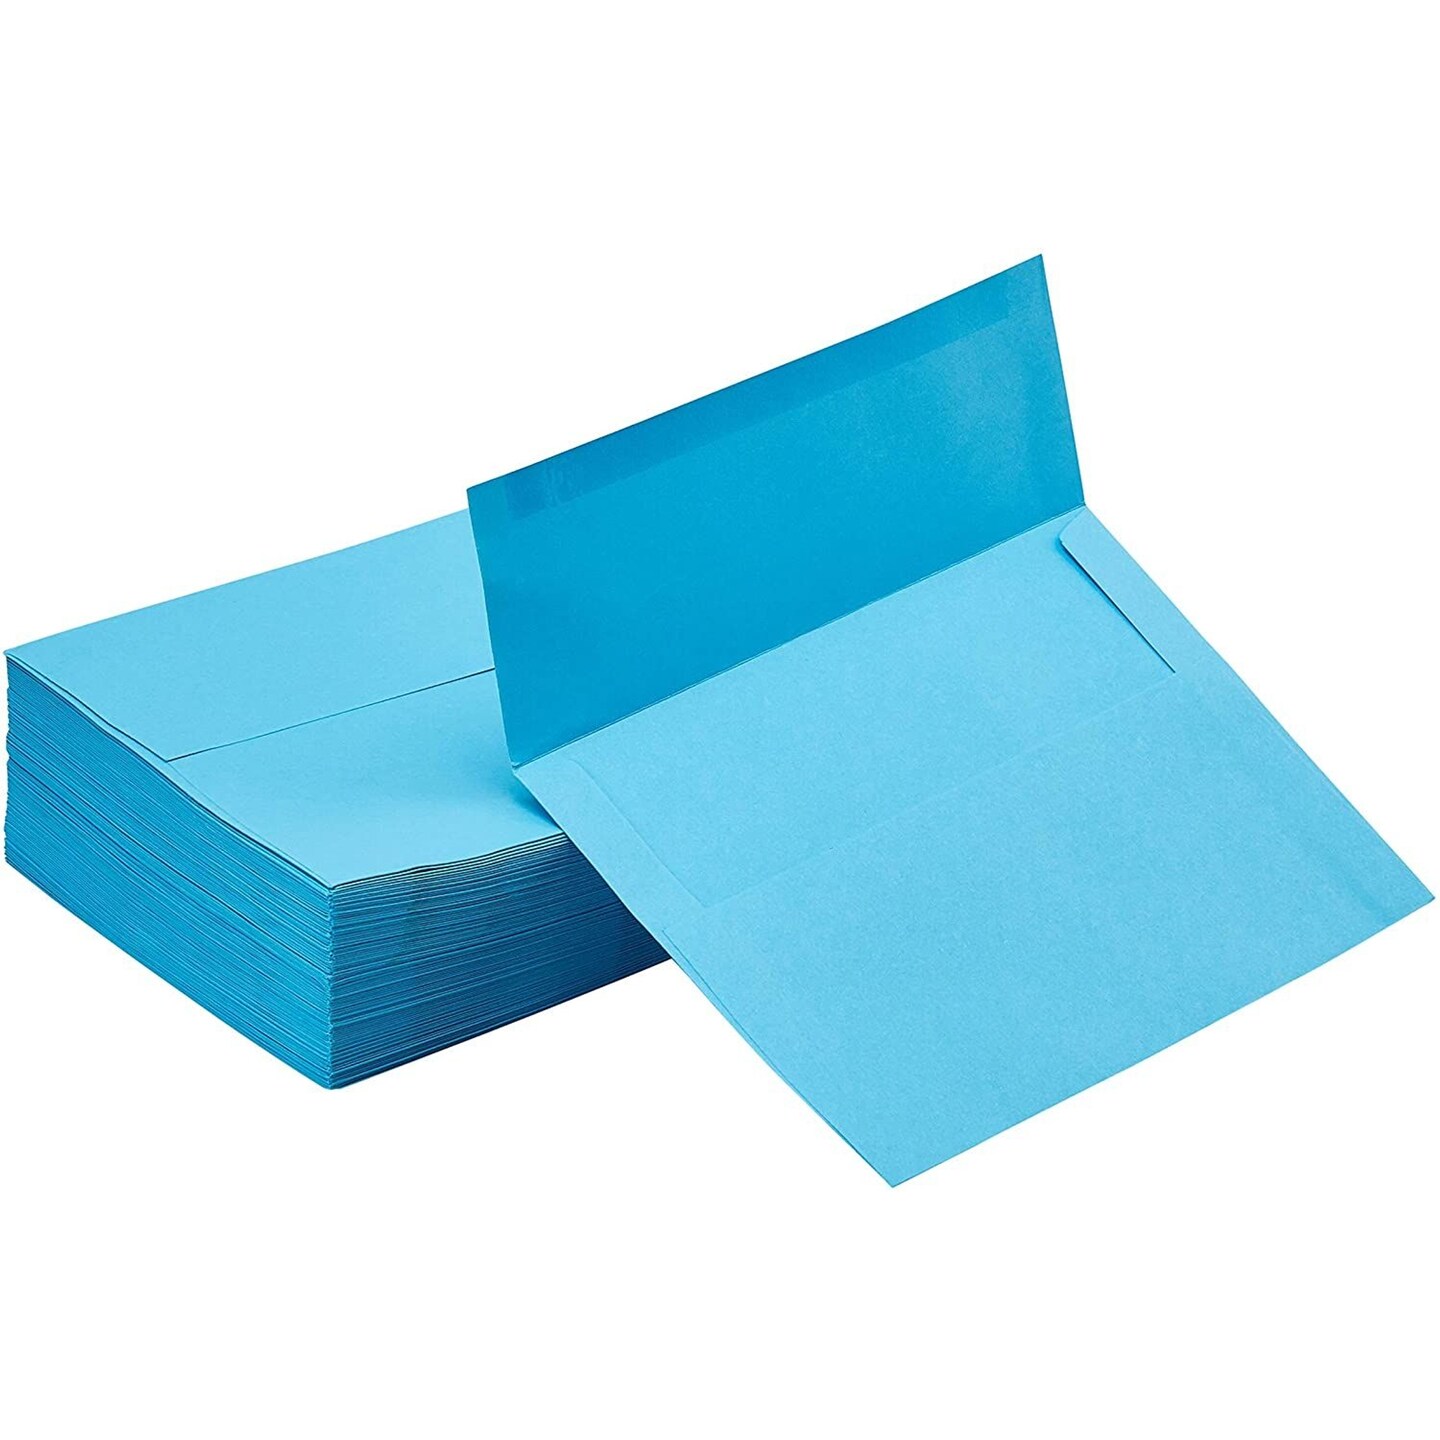 A7 Envelopes - 100 Pack Invitation Envelopes, 5x7 Gummed Seal Square-Flap  Invite Envelope for Wedding, Holiday, Birthday, Baby Shower, 120gsm, Aqua  Blue, 5.25 x 7.25 inches